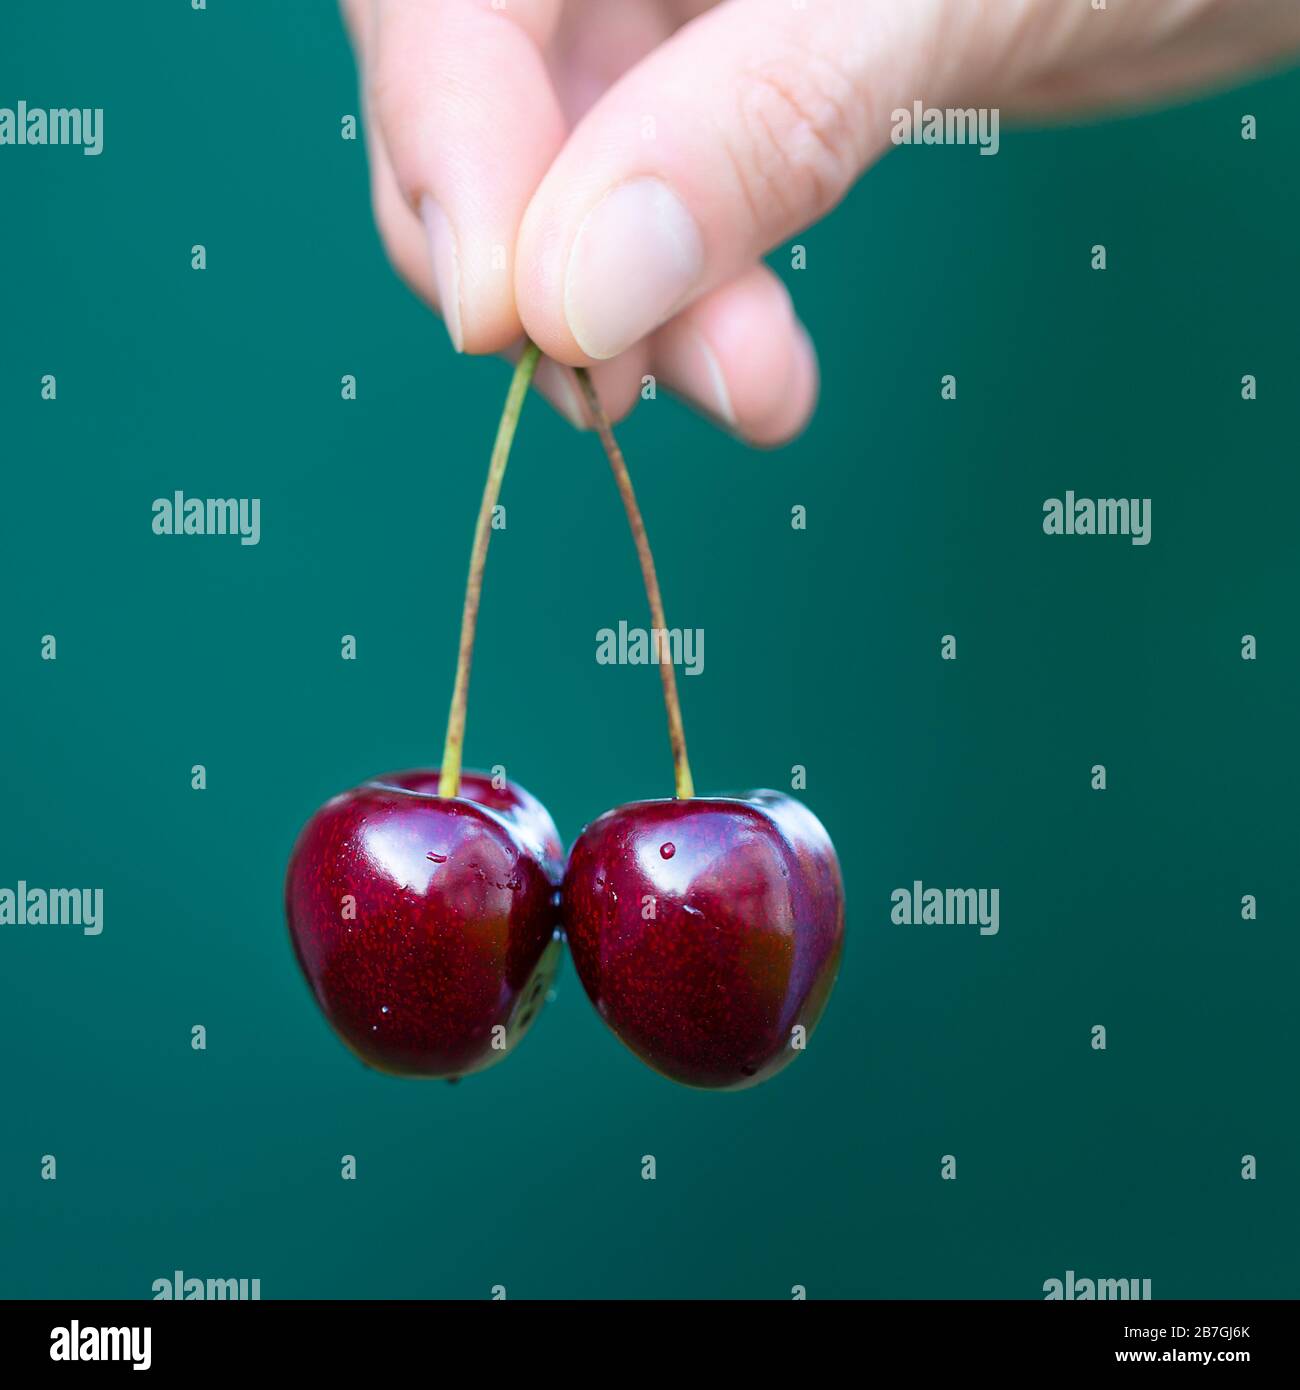 Two cherries in a woman's hand Stock Photo